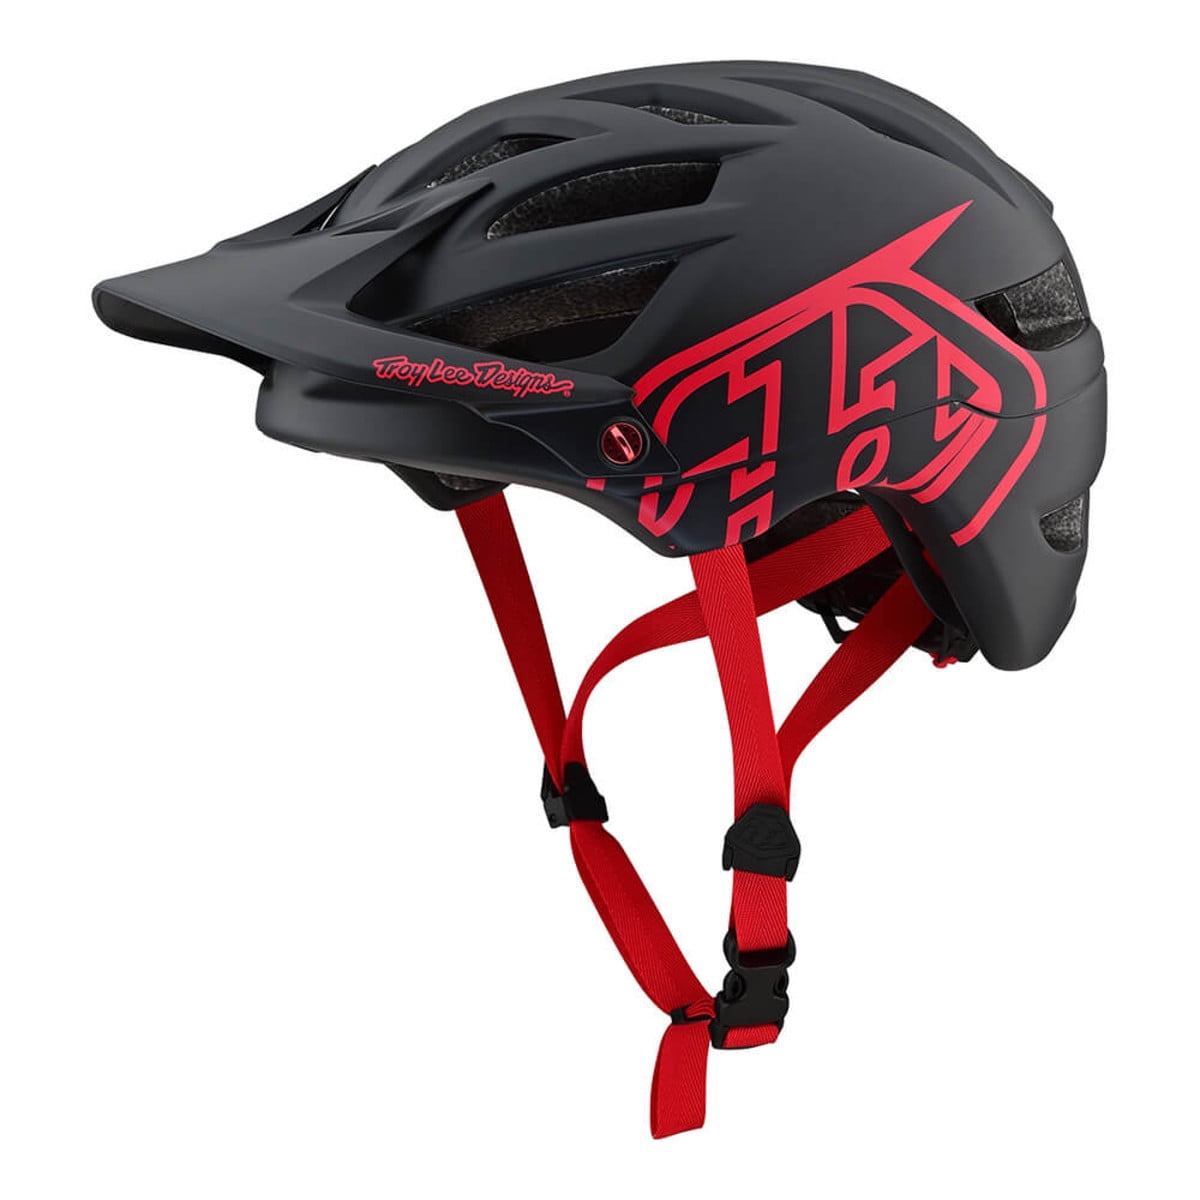 NEW Troy Lee Designs TLD A1 Downhill MTB Bicycle Helmet Galaxy Red Size M/L